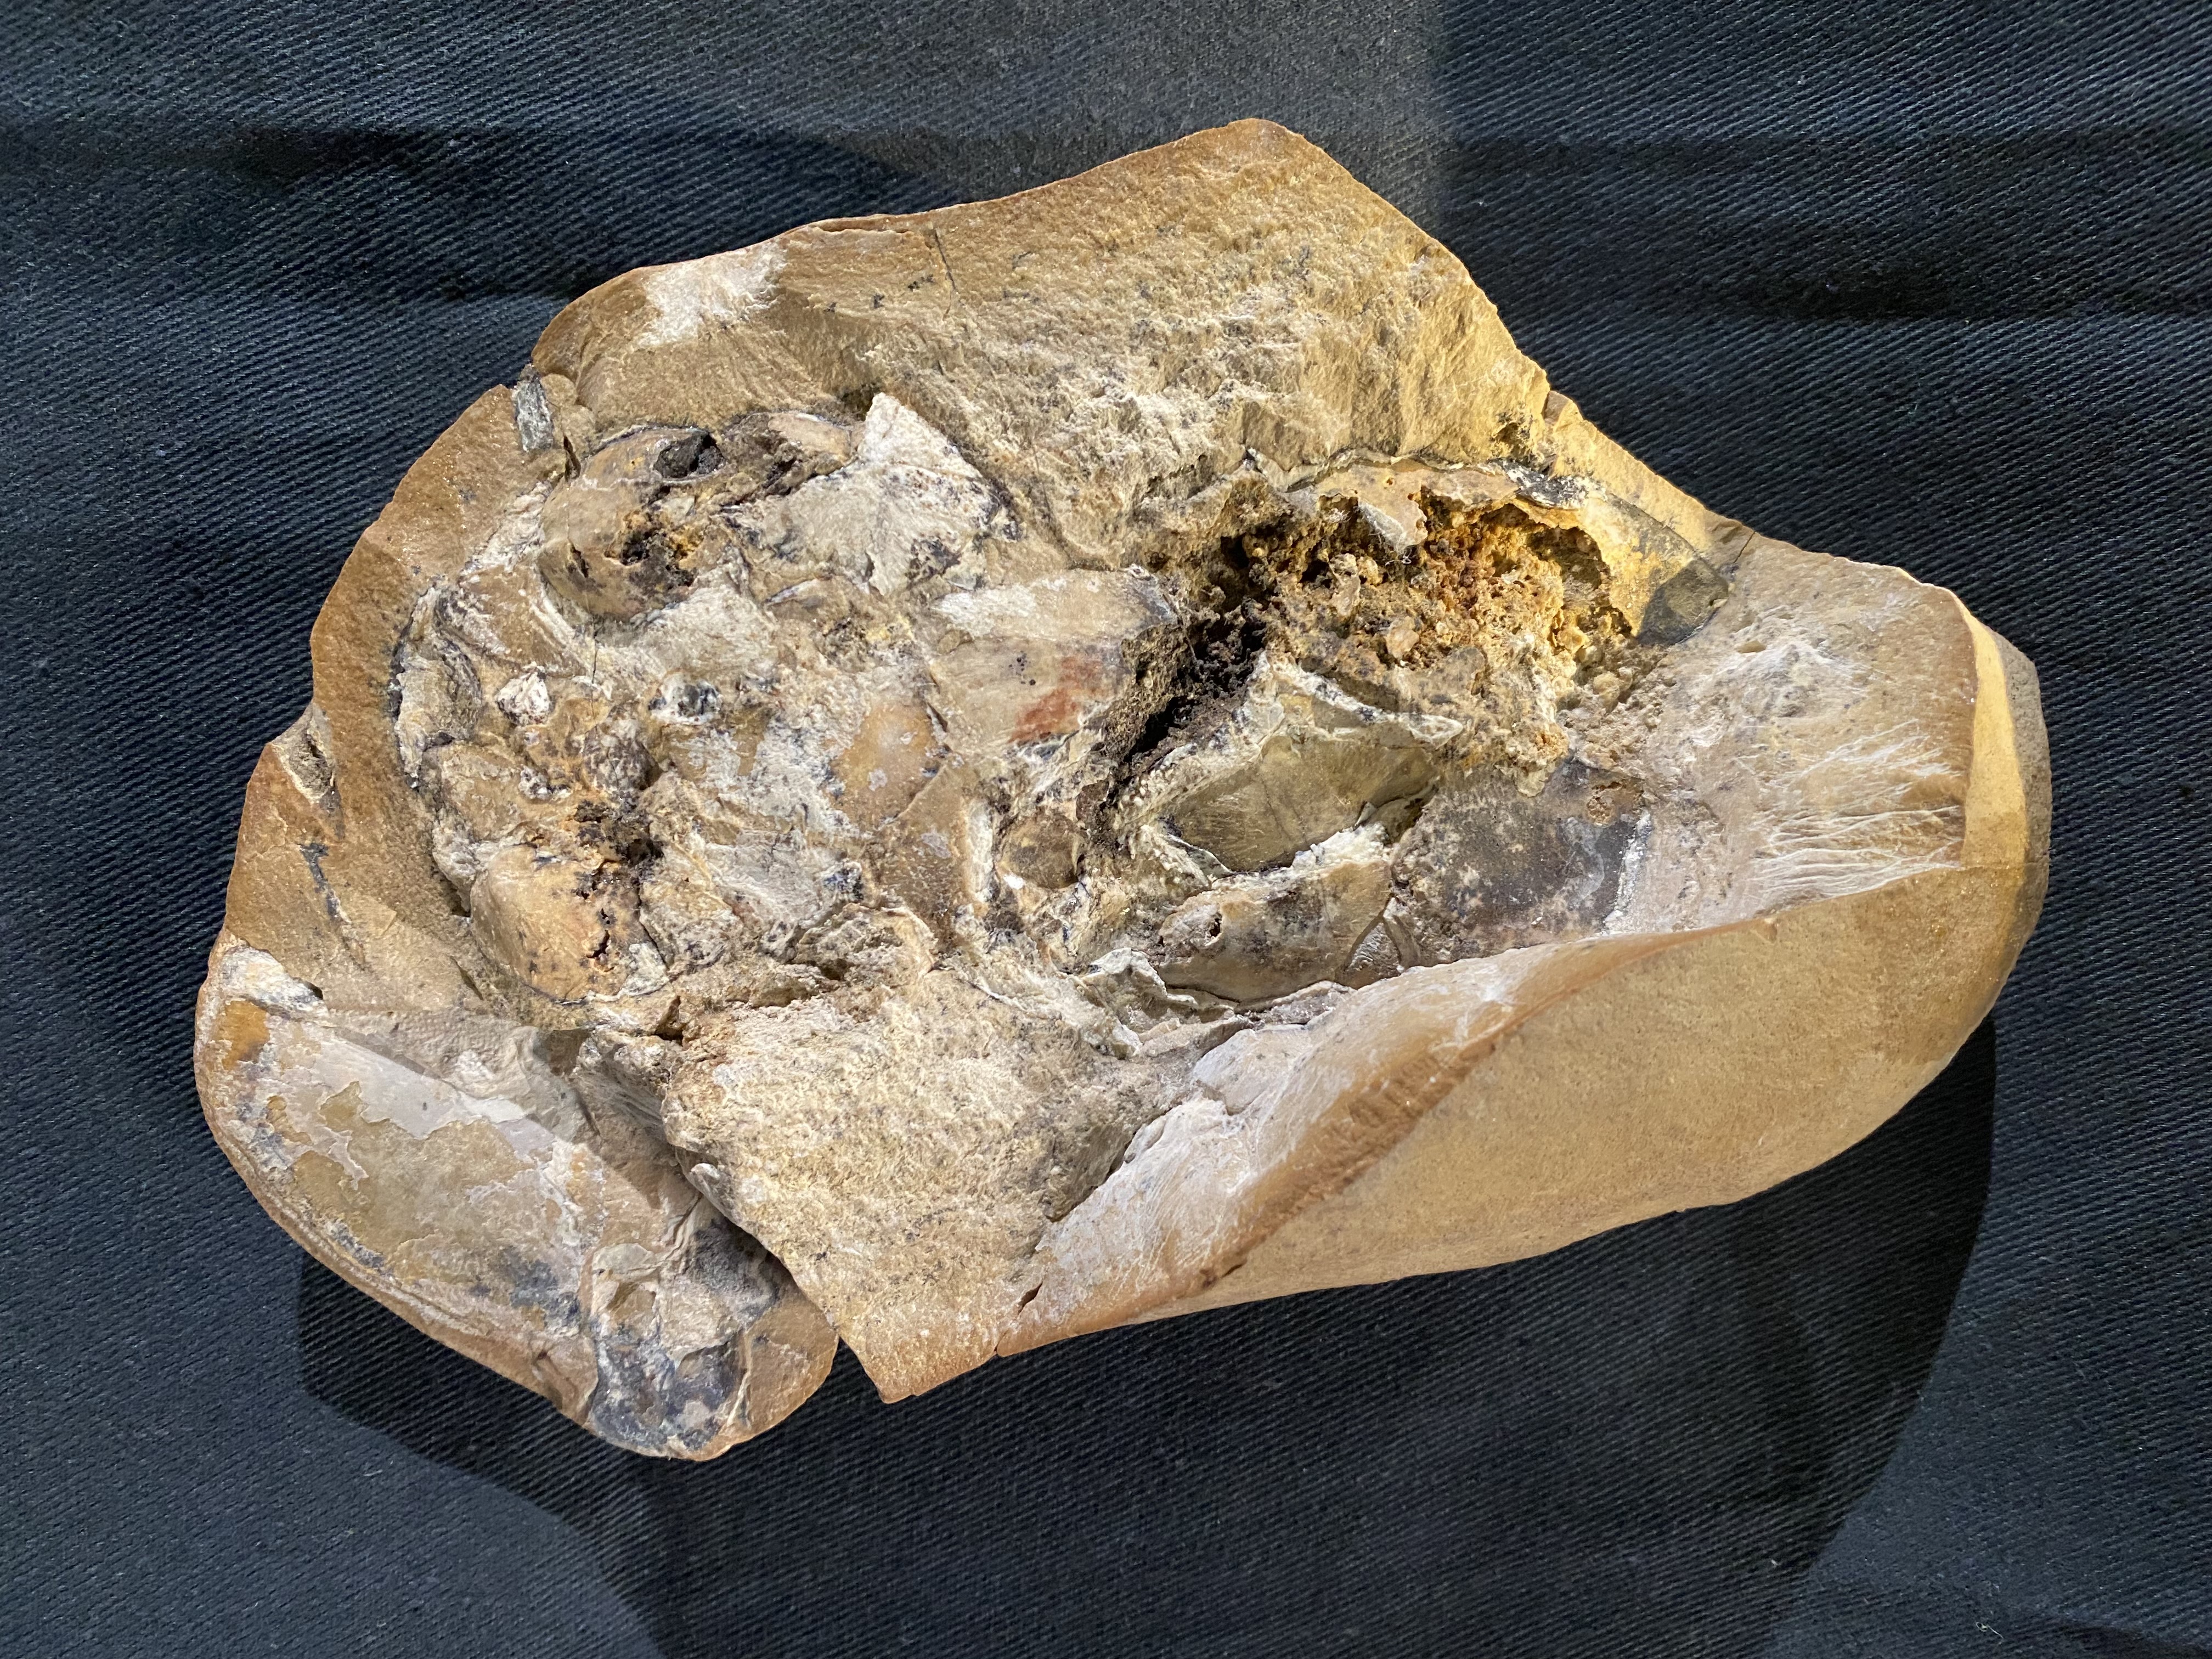 The fossil where the heart of a 380-million-year-old jawed fish was discovered